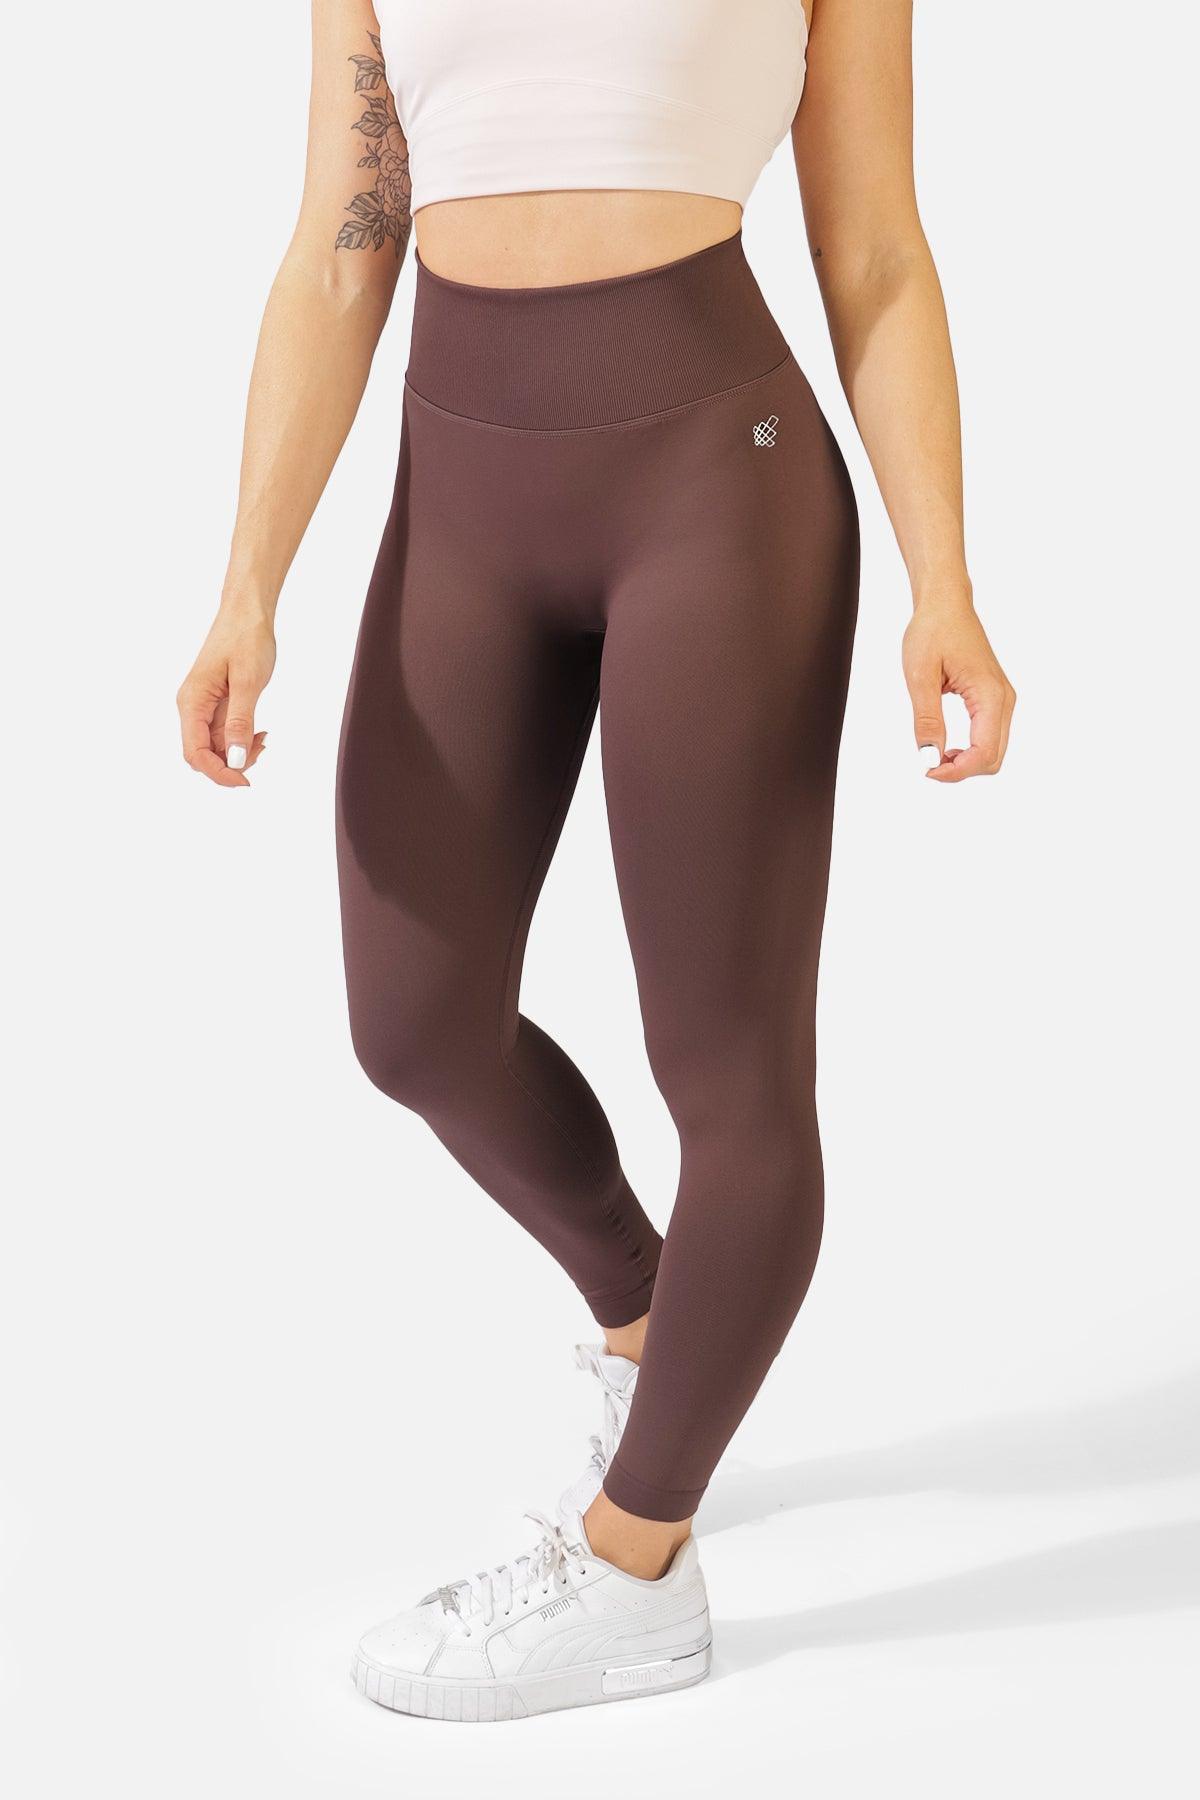 Yuly 360 Womens Leggings Pants Brown Ribbed Yoga Pull On Activewear Solid  XS New